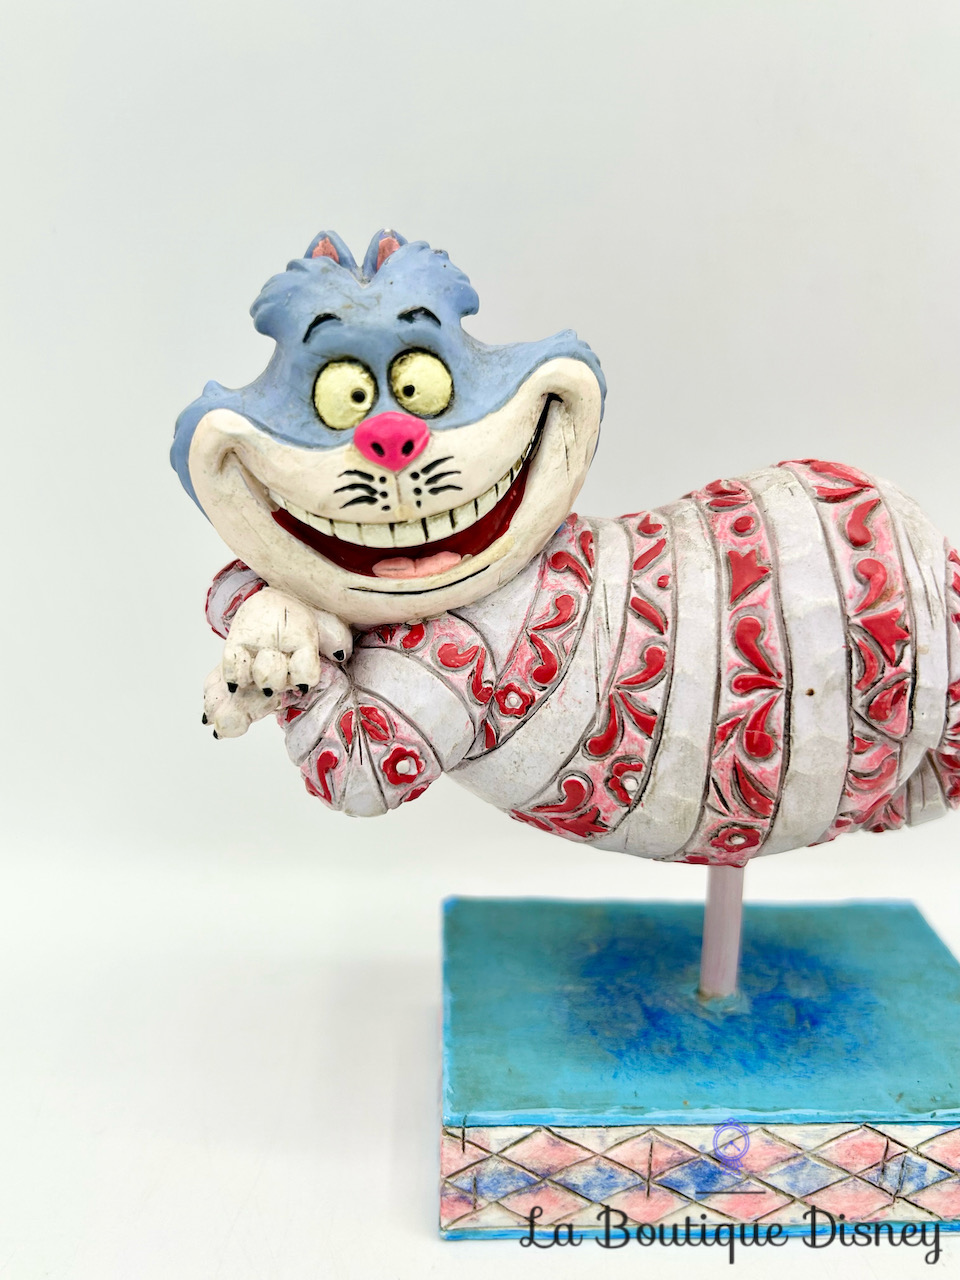 figurine-jim-shore-grinning-cheshire-alice-in-wonderland-disney-traditions-showcase-collection-enesco-4007211-alice-au-pays-des-merveilles-chat-cheshire-4